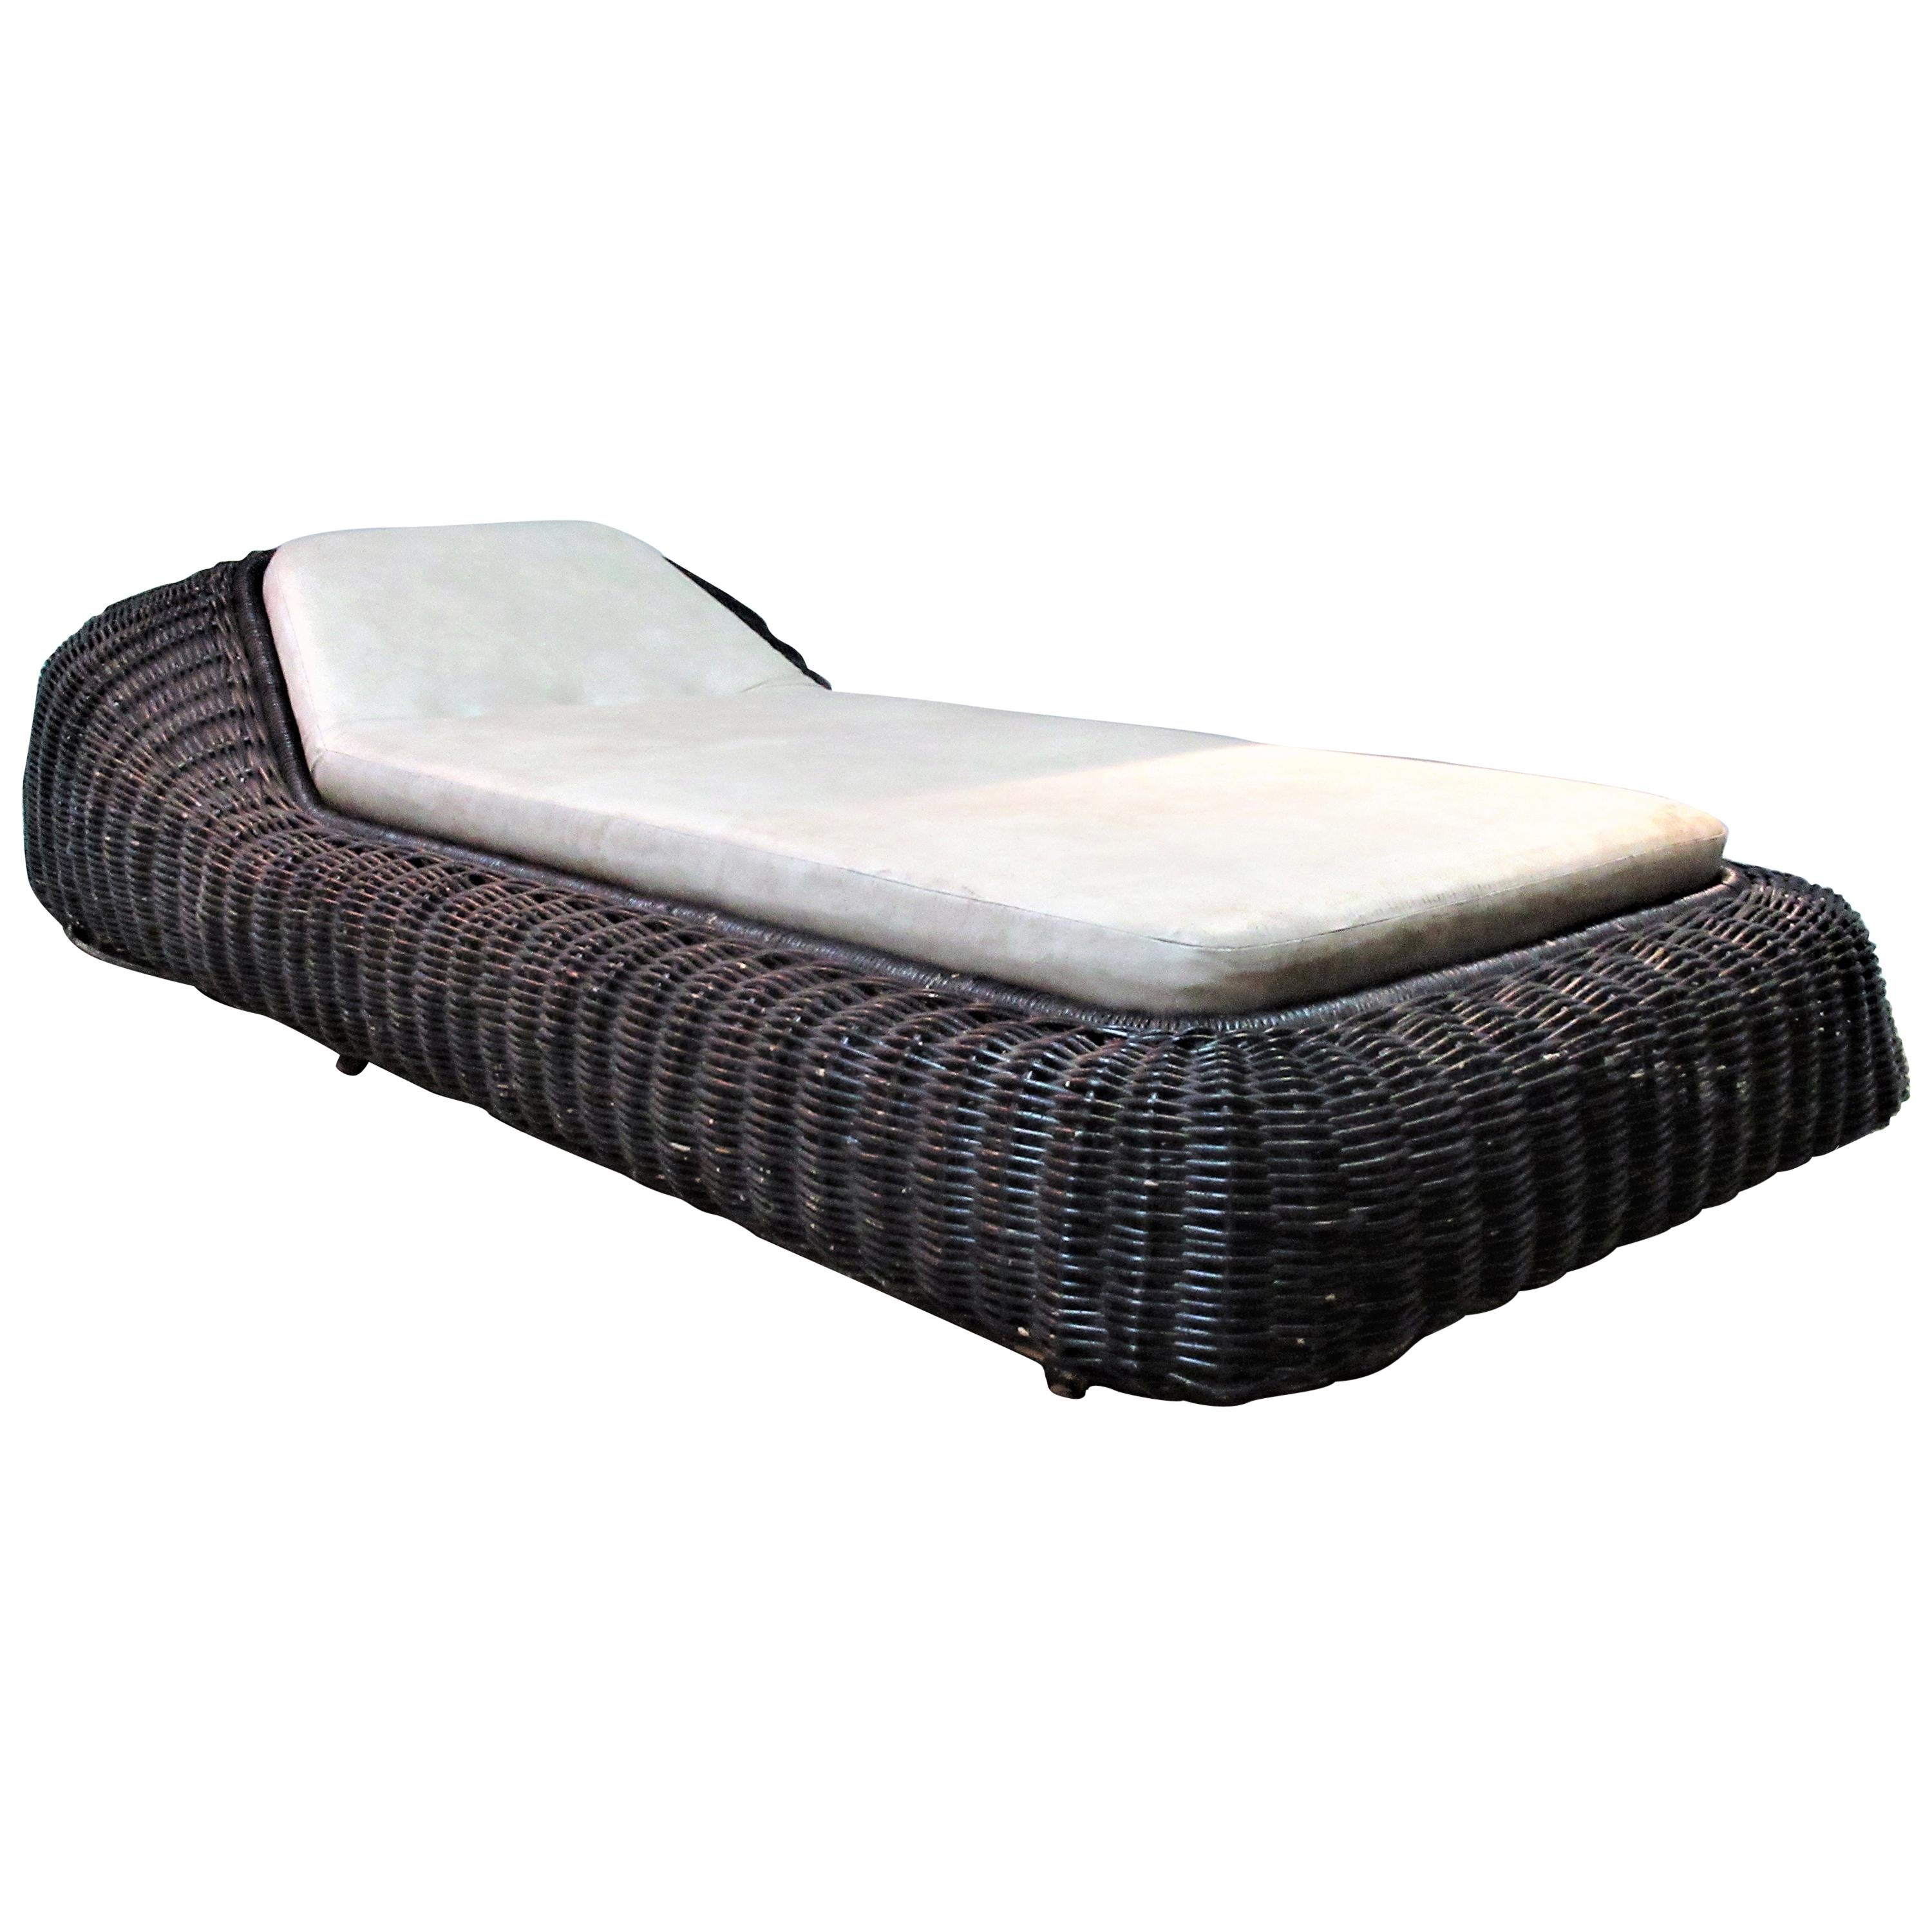    Vivai Del Sud Wicker Chaise Lounge, Italy 1970's For Sale